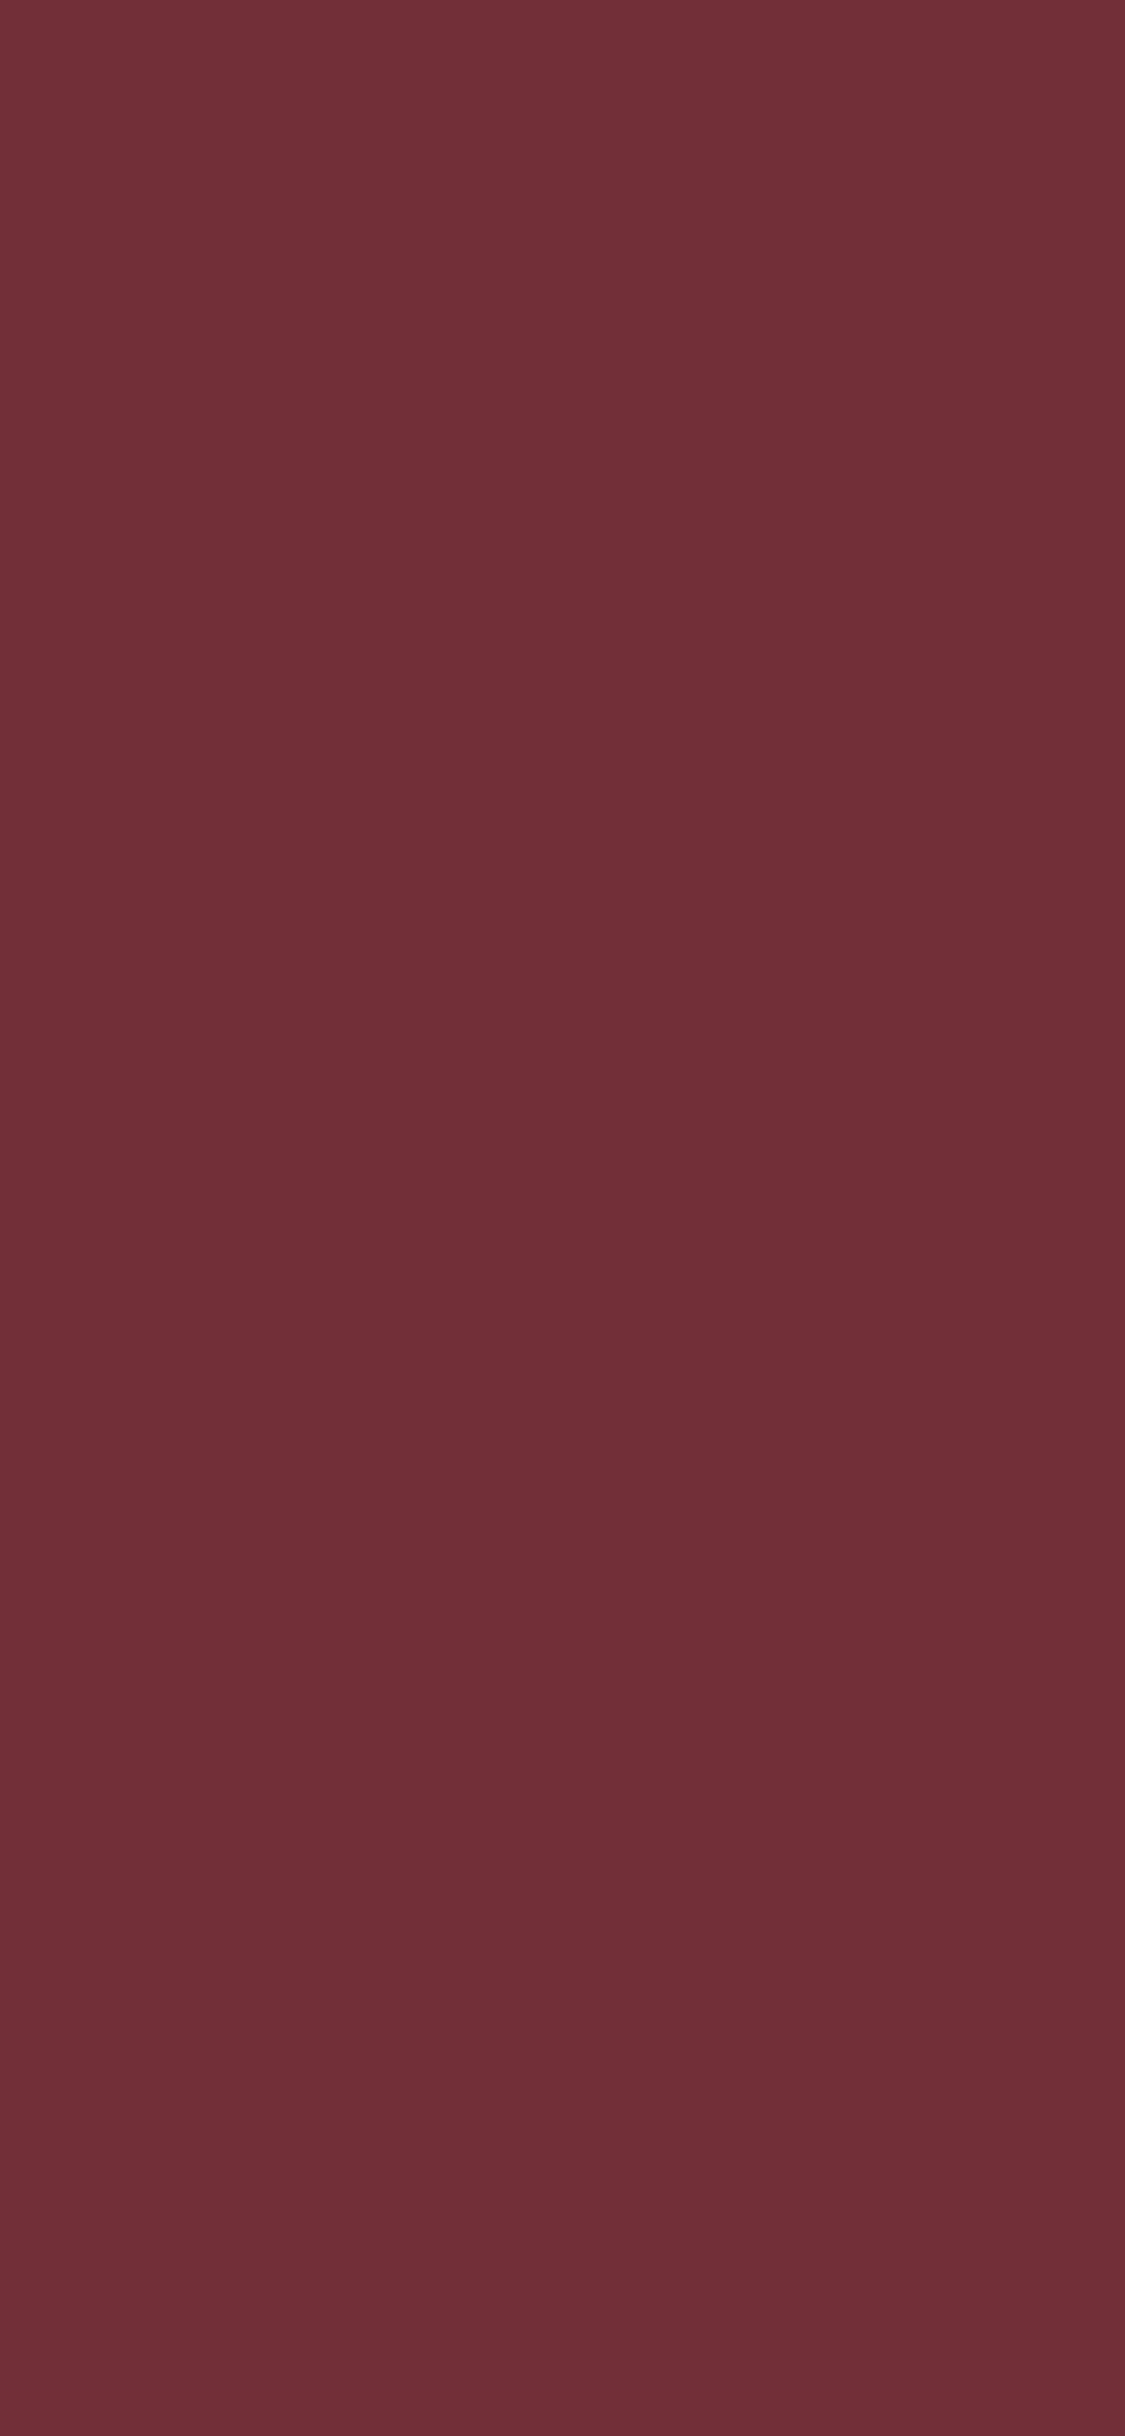 1125x2436 Wine Solid Color Background